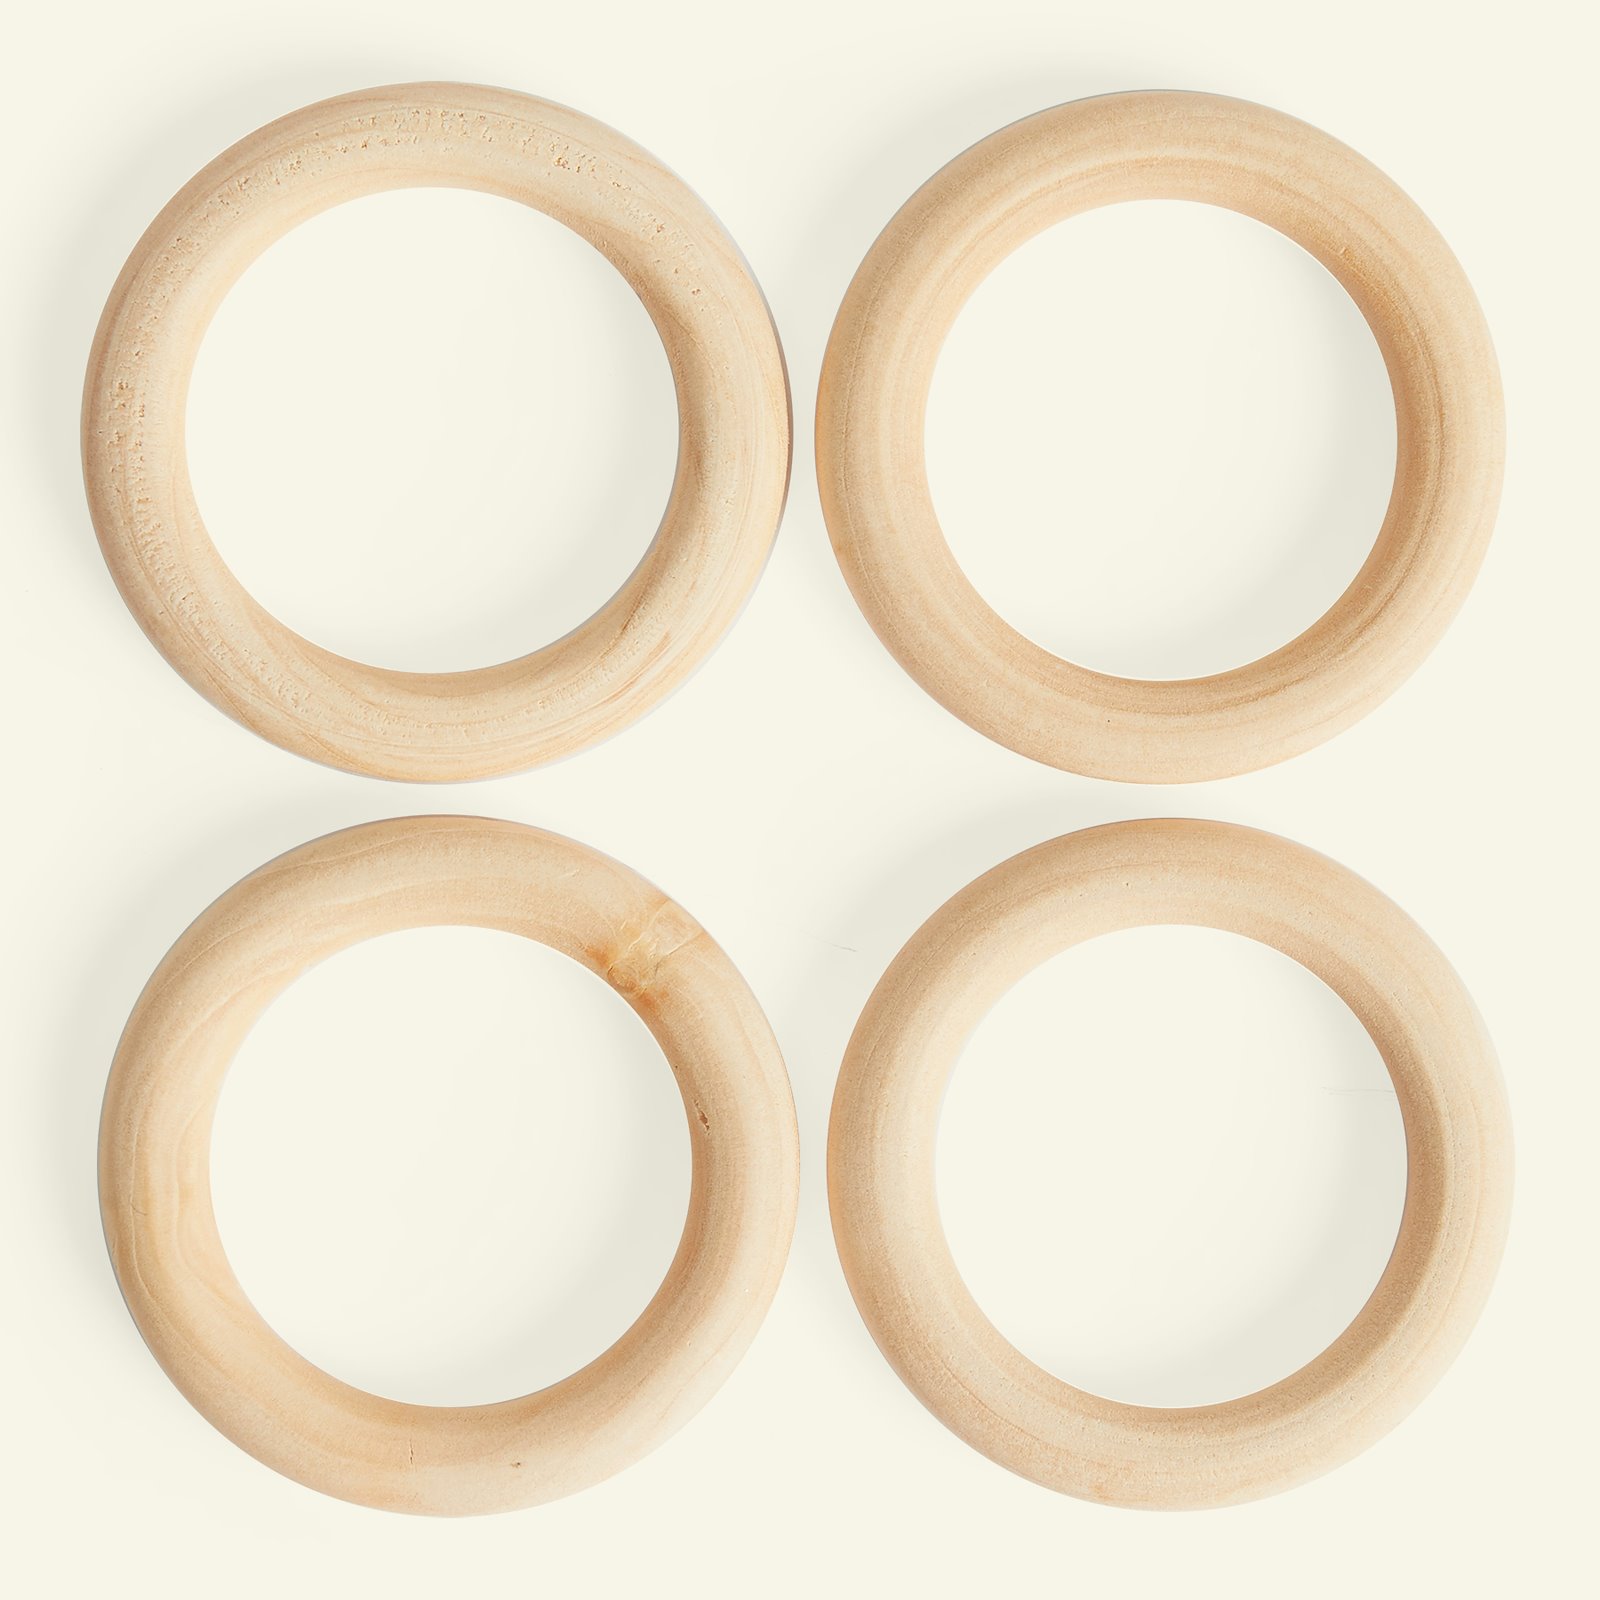 Wooden ring for decoration 40/57mm 4pcs 43164_pack_b